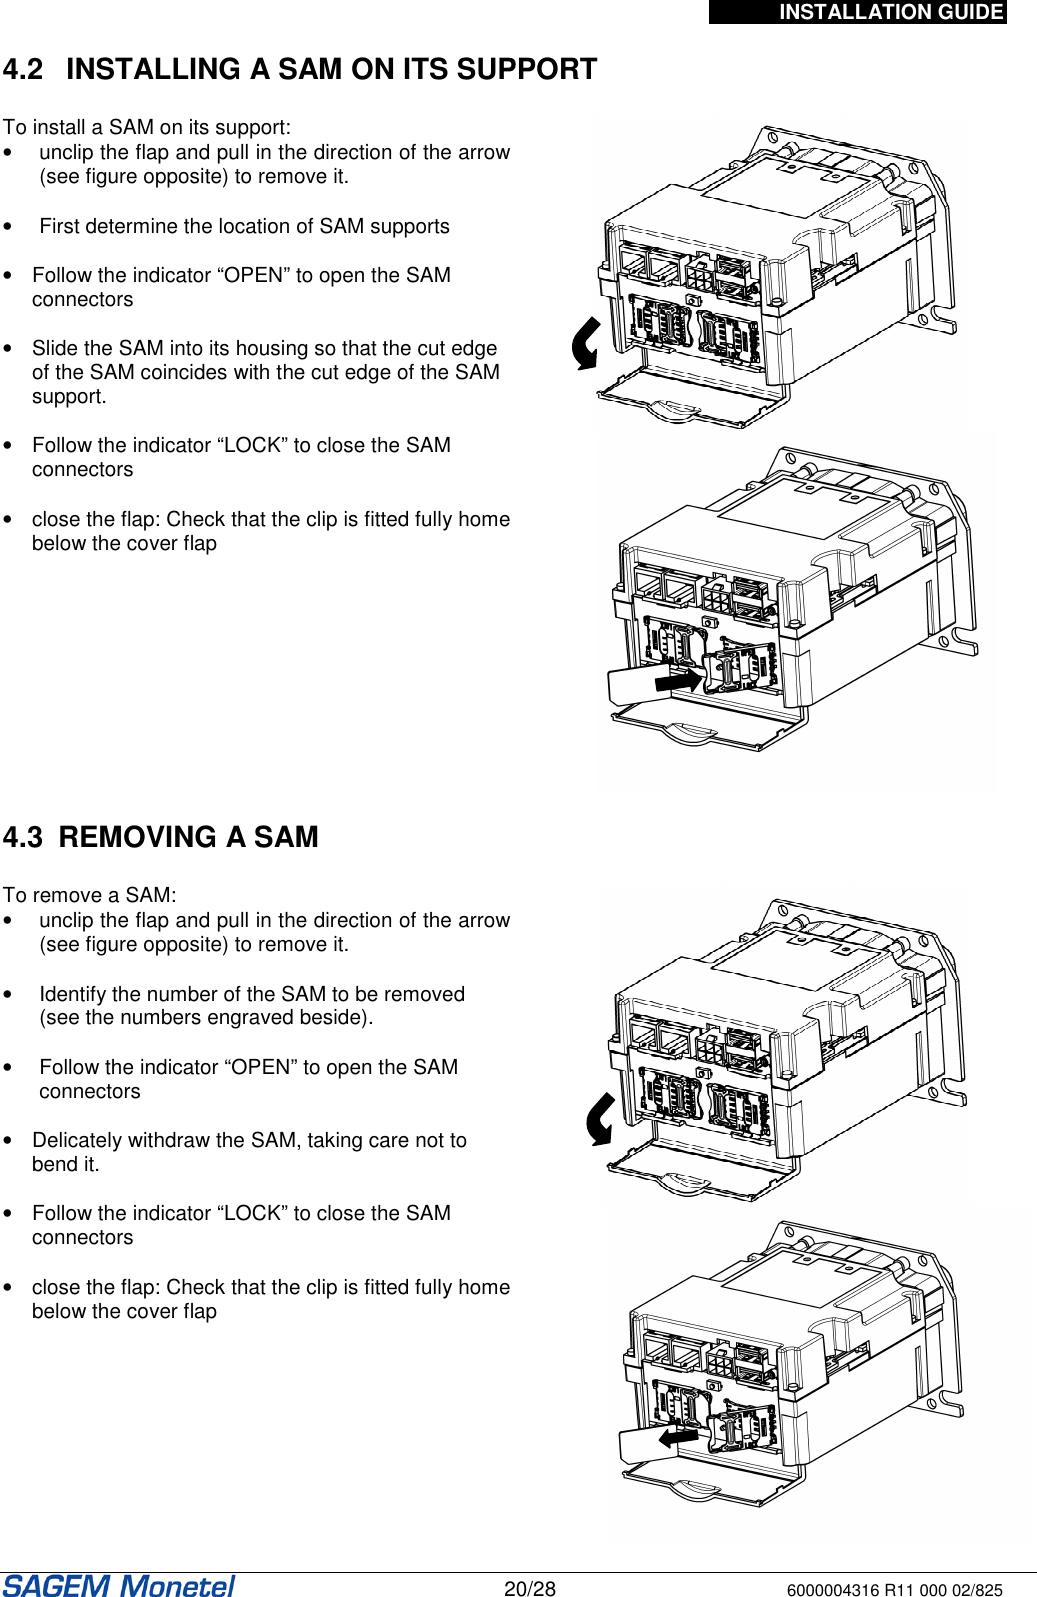 INSTALLATION GUIDE   20/28 6000004316 R11 000 02/825  4.2   INSTALLING A SAM ON ITS SUPPORT   To install a SAM on its support: •  unclip the flap and pull in the direction of the arrow (see figure opposite) to remove it.  •  First determine the location of SAM supports   •  Follow the indicator “OPEN” to open the SAM connectors  •  Slide the SAM into its housing so that the cut edge of the SAM coincides with the cut edge of the SAM support.   •  Follow the indicator “LOCK” to close the SAM connectors  •  close the flap: Check that the clip is fitted fully home below the cover flap      4.3  REMOVING A SAM   To remove a SAM: •  unclip the flap and pull in the direction of the arrow (see figure opposite) to remove it.  •  Identify the number of the SAM to be removed (see the numbers engraved beside).   •  Follow the indicator “OPEN” to open the SAM connectors  •  Delicately withdraw the SAM, taking care not to bend it.   •  Follow the indicator “LOCK” to close the SAM connectors  •  close the flap: Check that the clip is fitted fully home below the cover flap                  